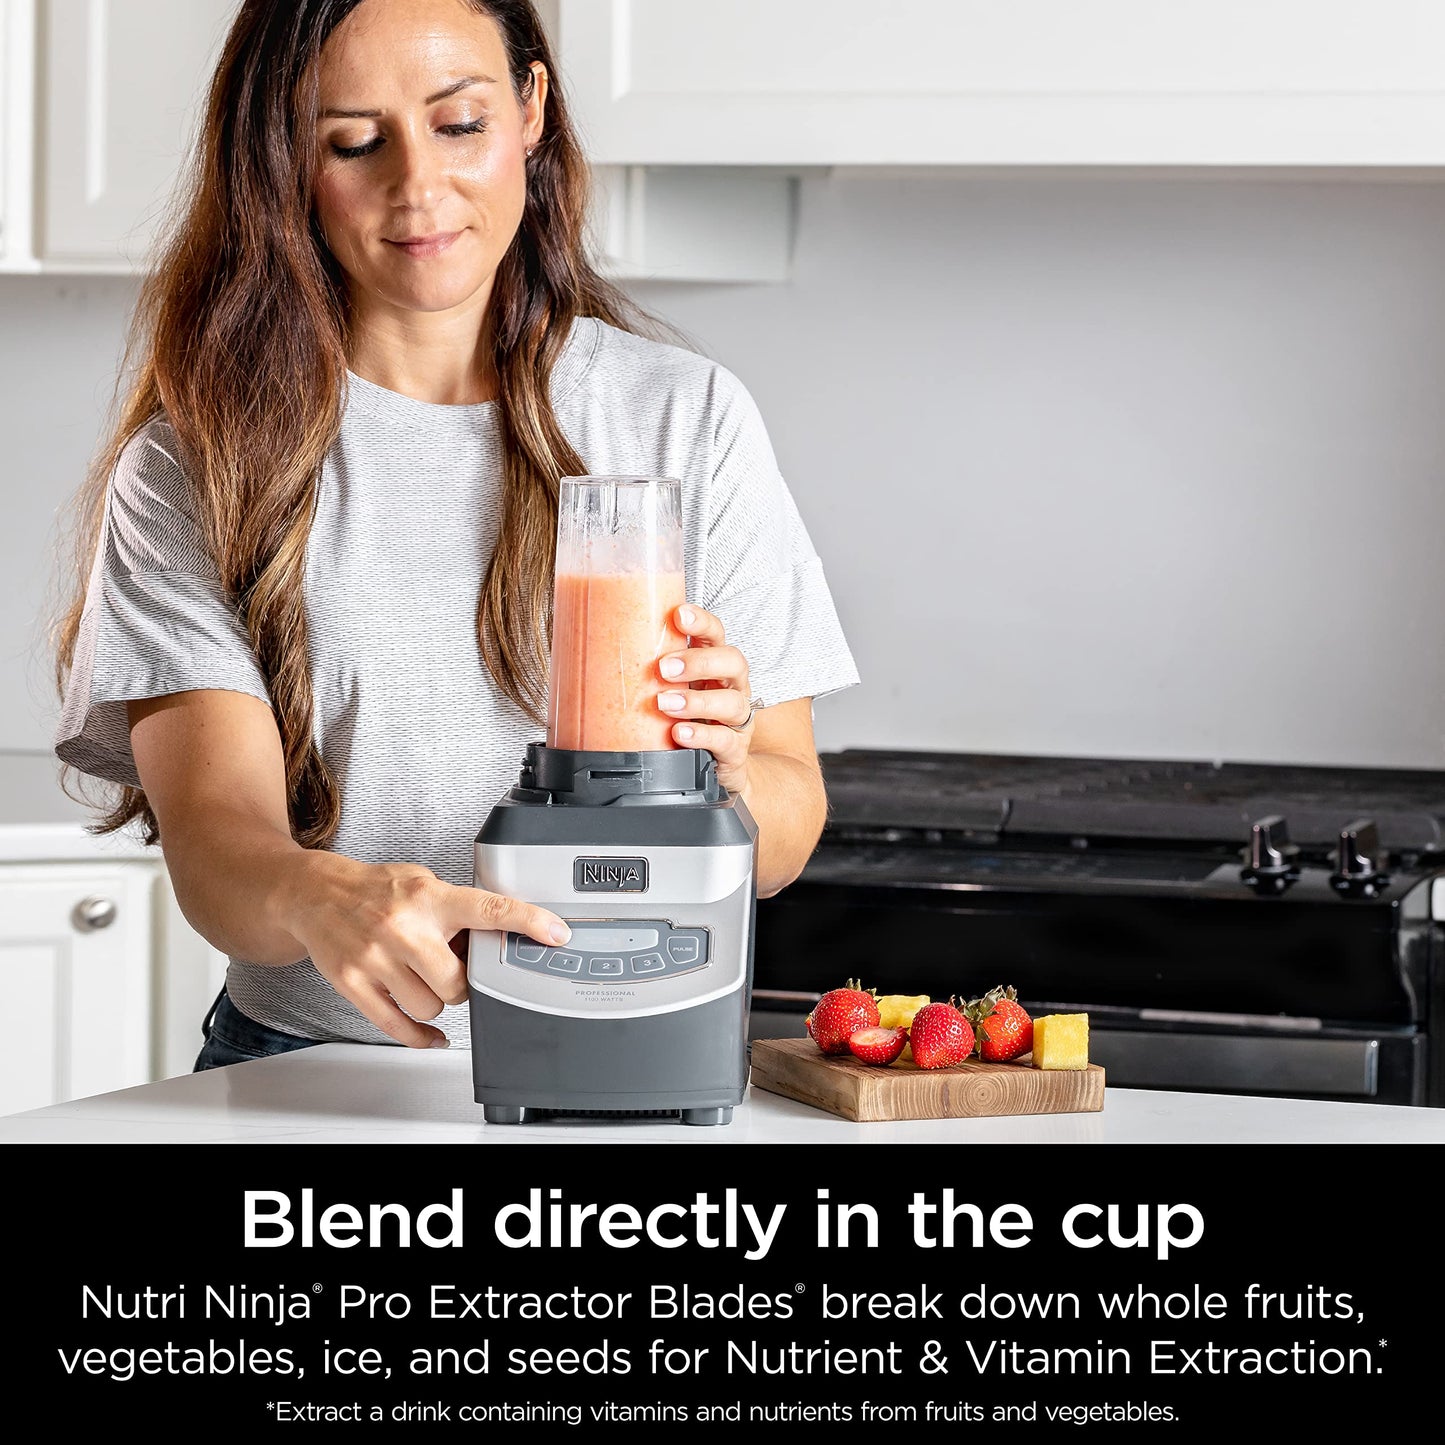 Ninja BL660 Professional Compact Smoothie & Food Processing Blender, 1100-Watts, 3 Functions -for Frozen Drinks, Smoothies, Sauces, & More, 72-oz.* Pitcher, (2) 16-oz. To-Go Cups & Spout Lids, Gray